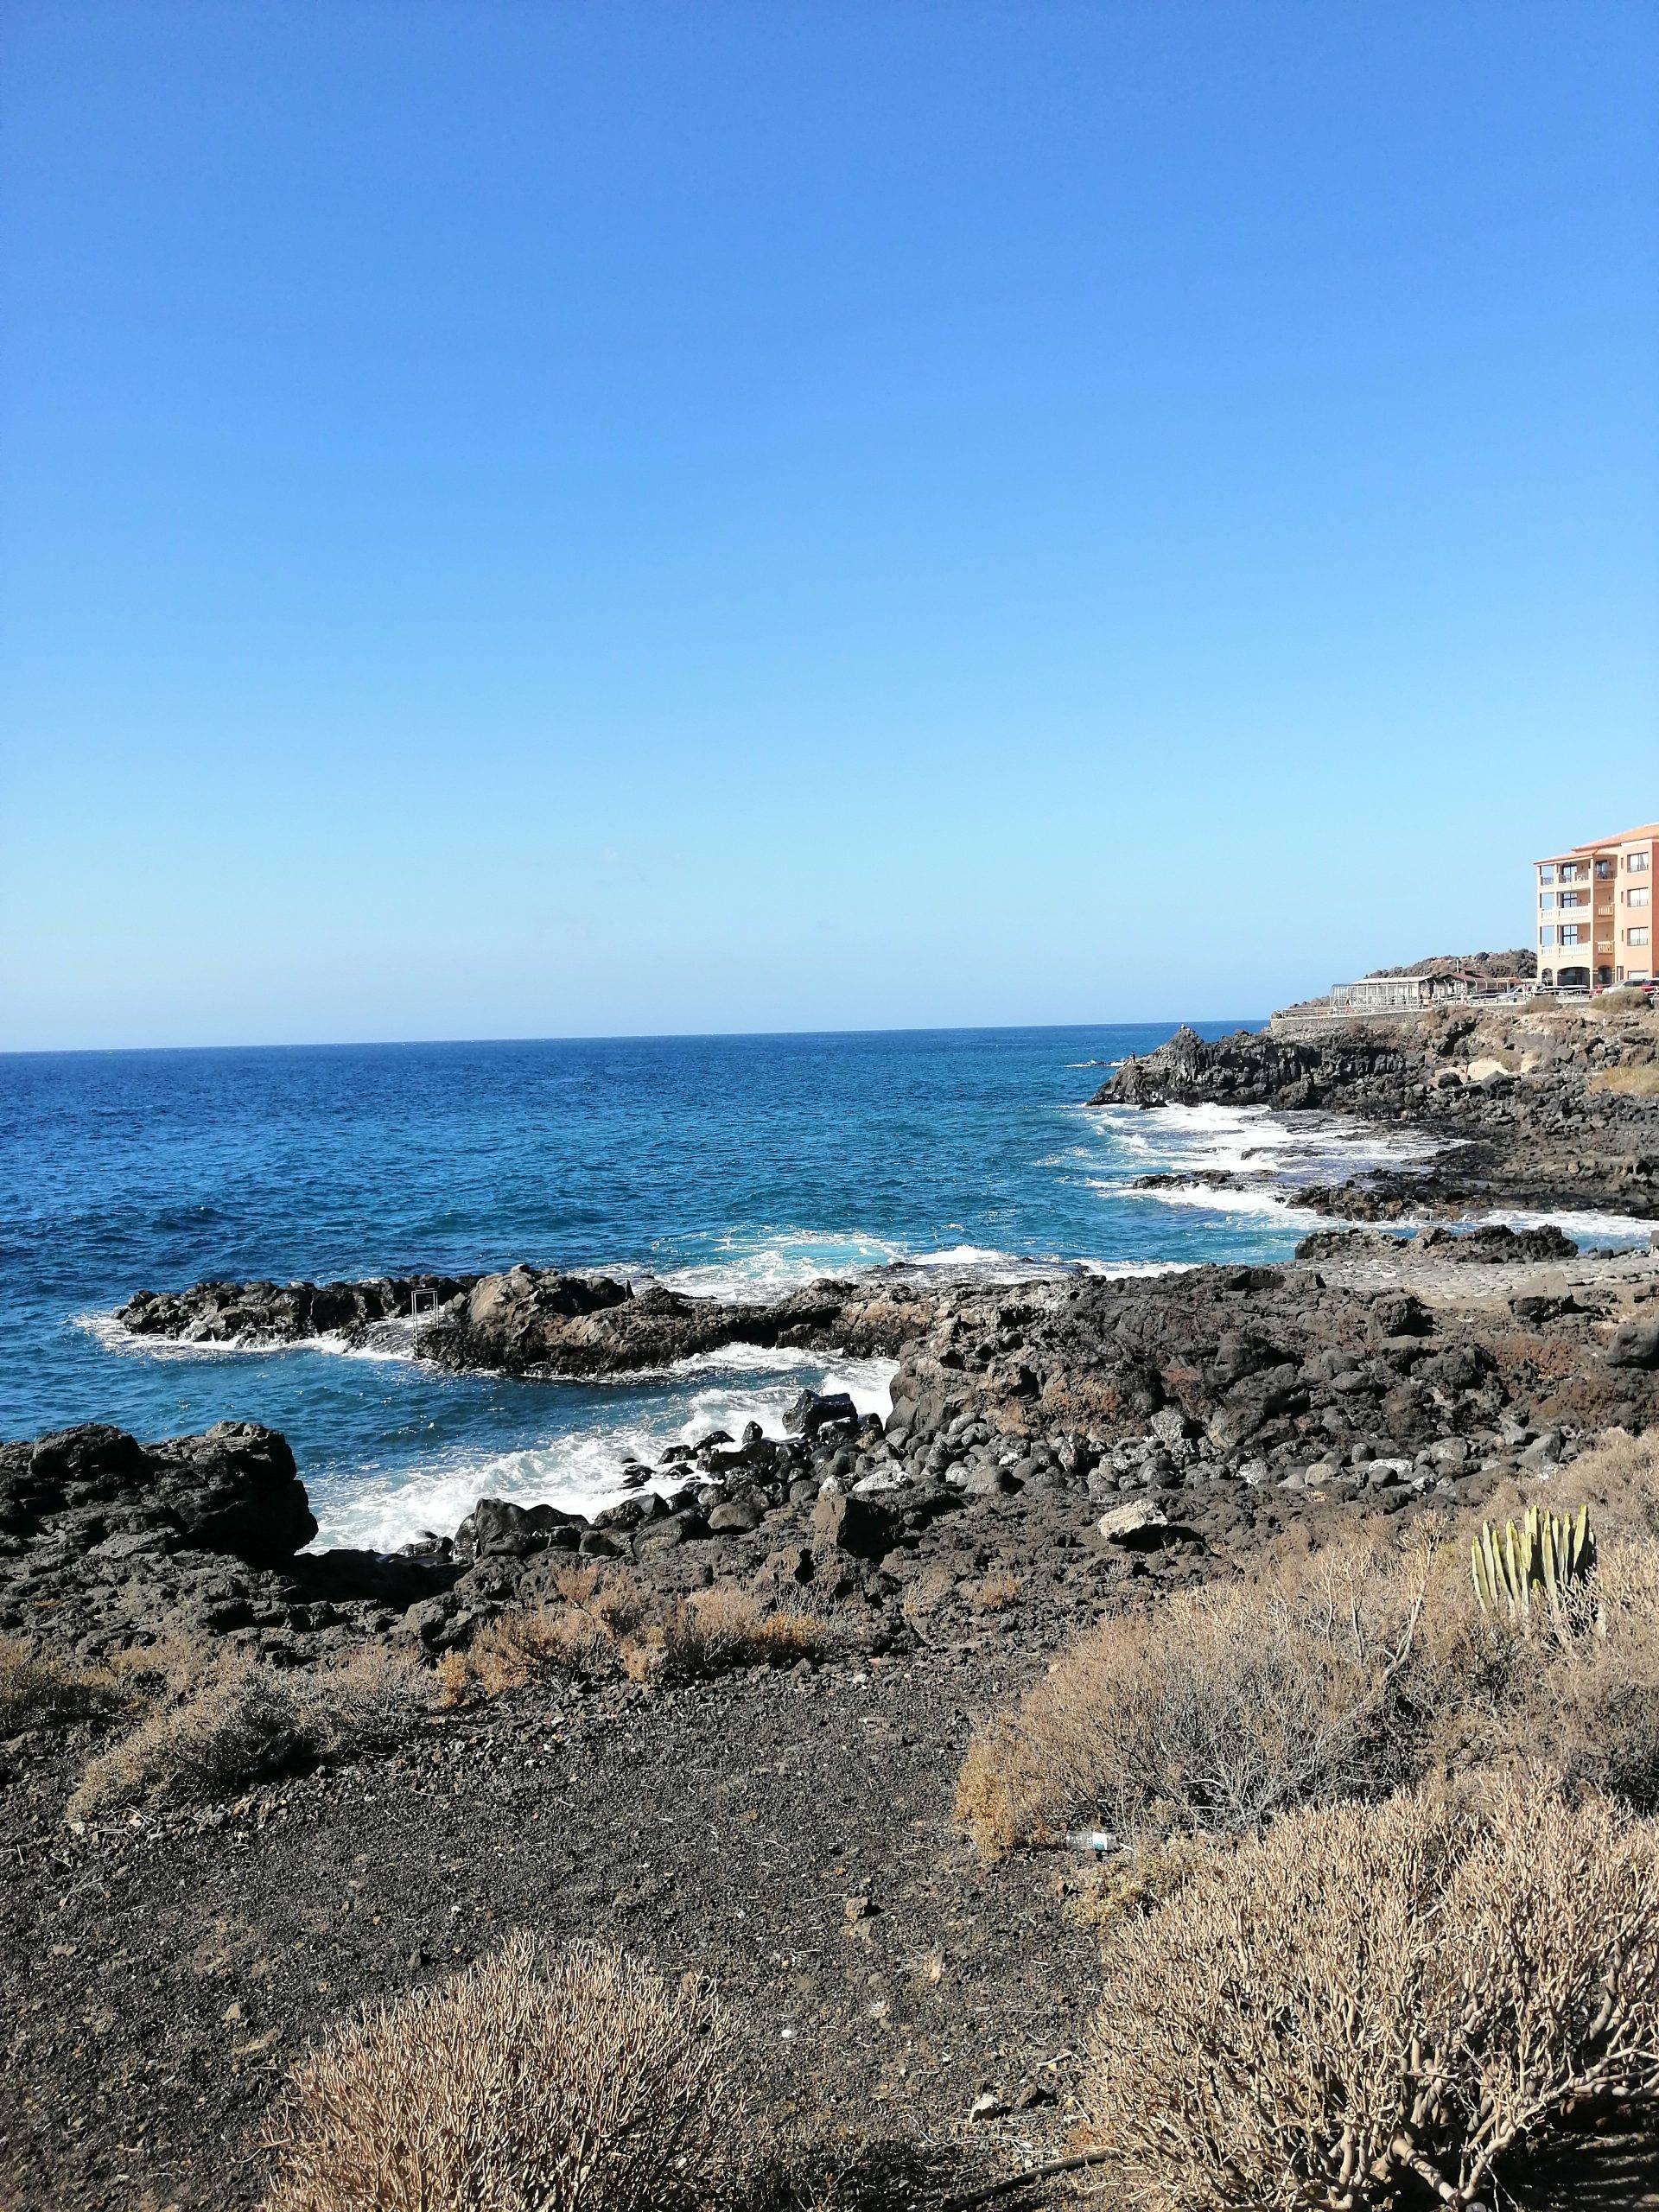 Where to stay in Tenerife?